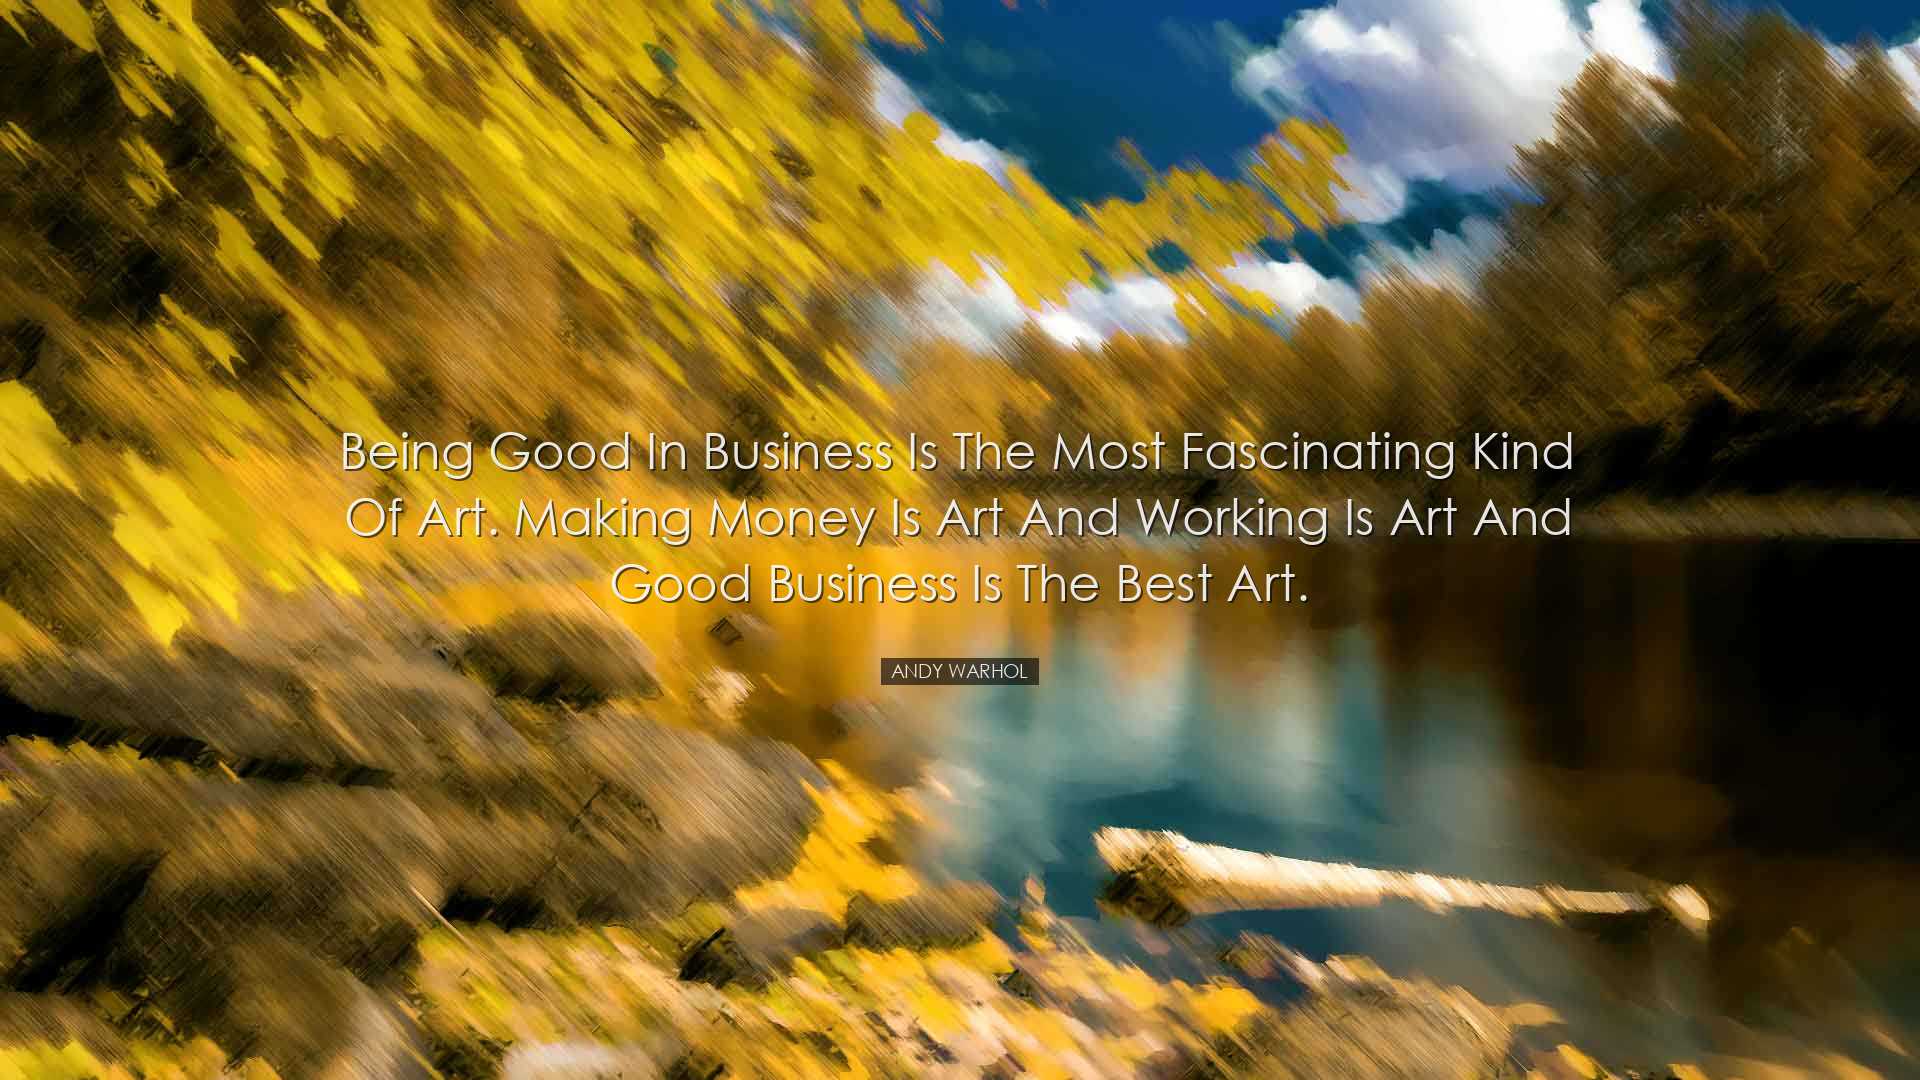 Being good in business is the most fascinating kind of art. Making